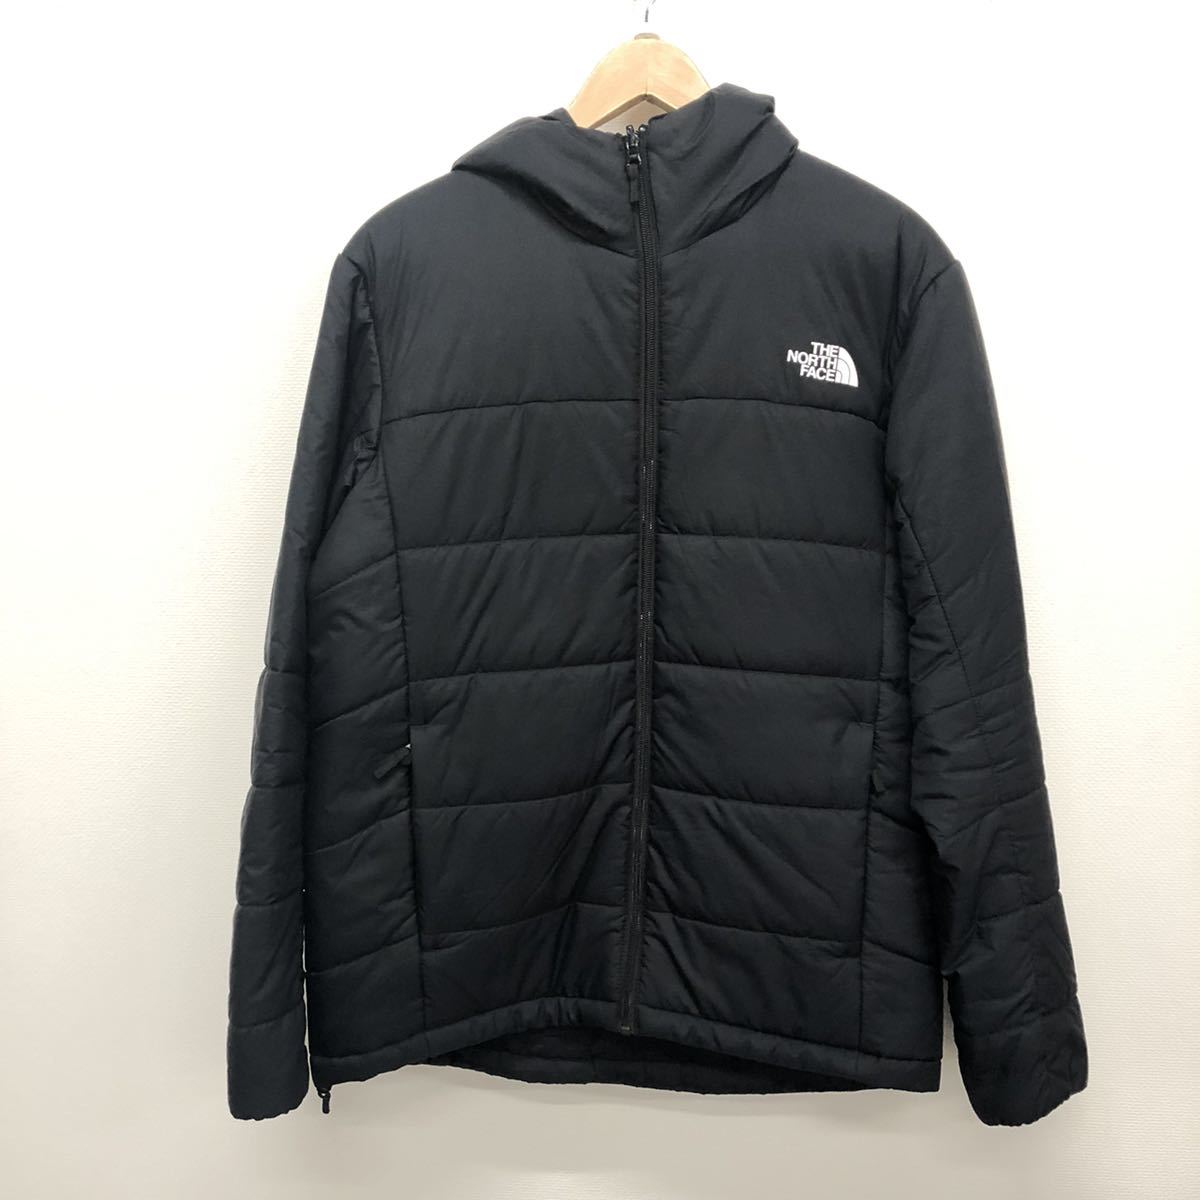 【THE NORTH FACE】ザノースフェイス★リバーシブル中綿ジャケット REVERSIBLE ANYTIME INSULATED HOODIE サイズM NY82180 04